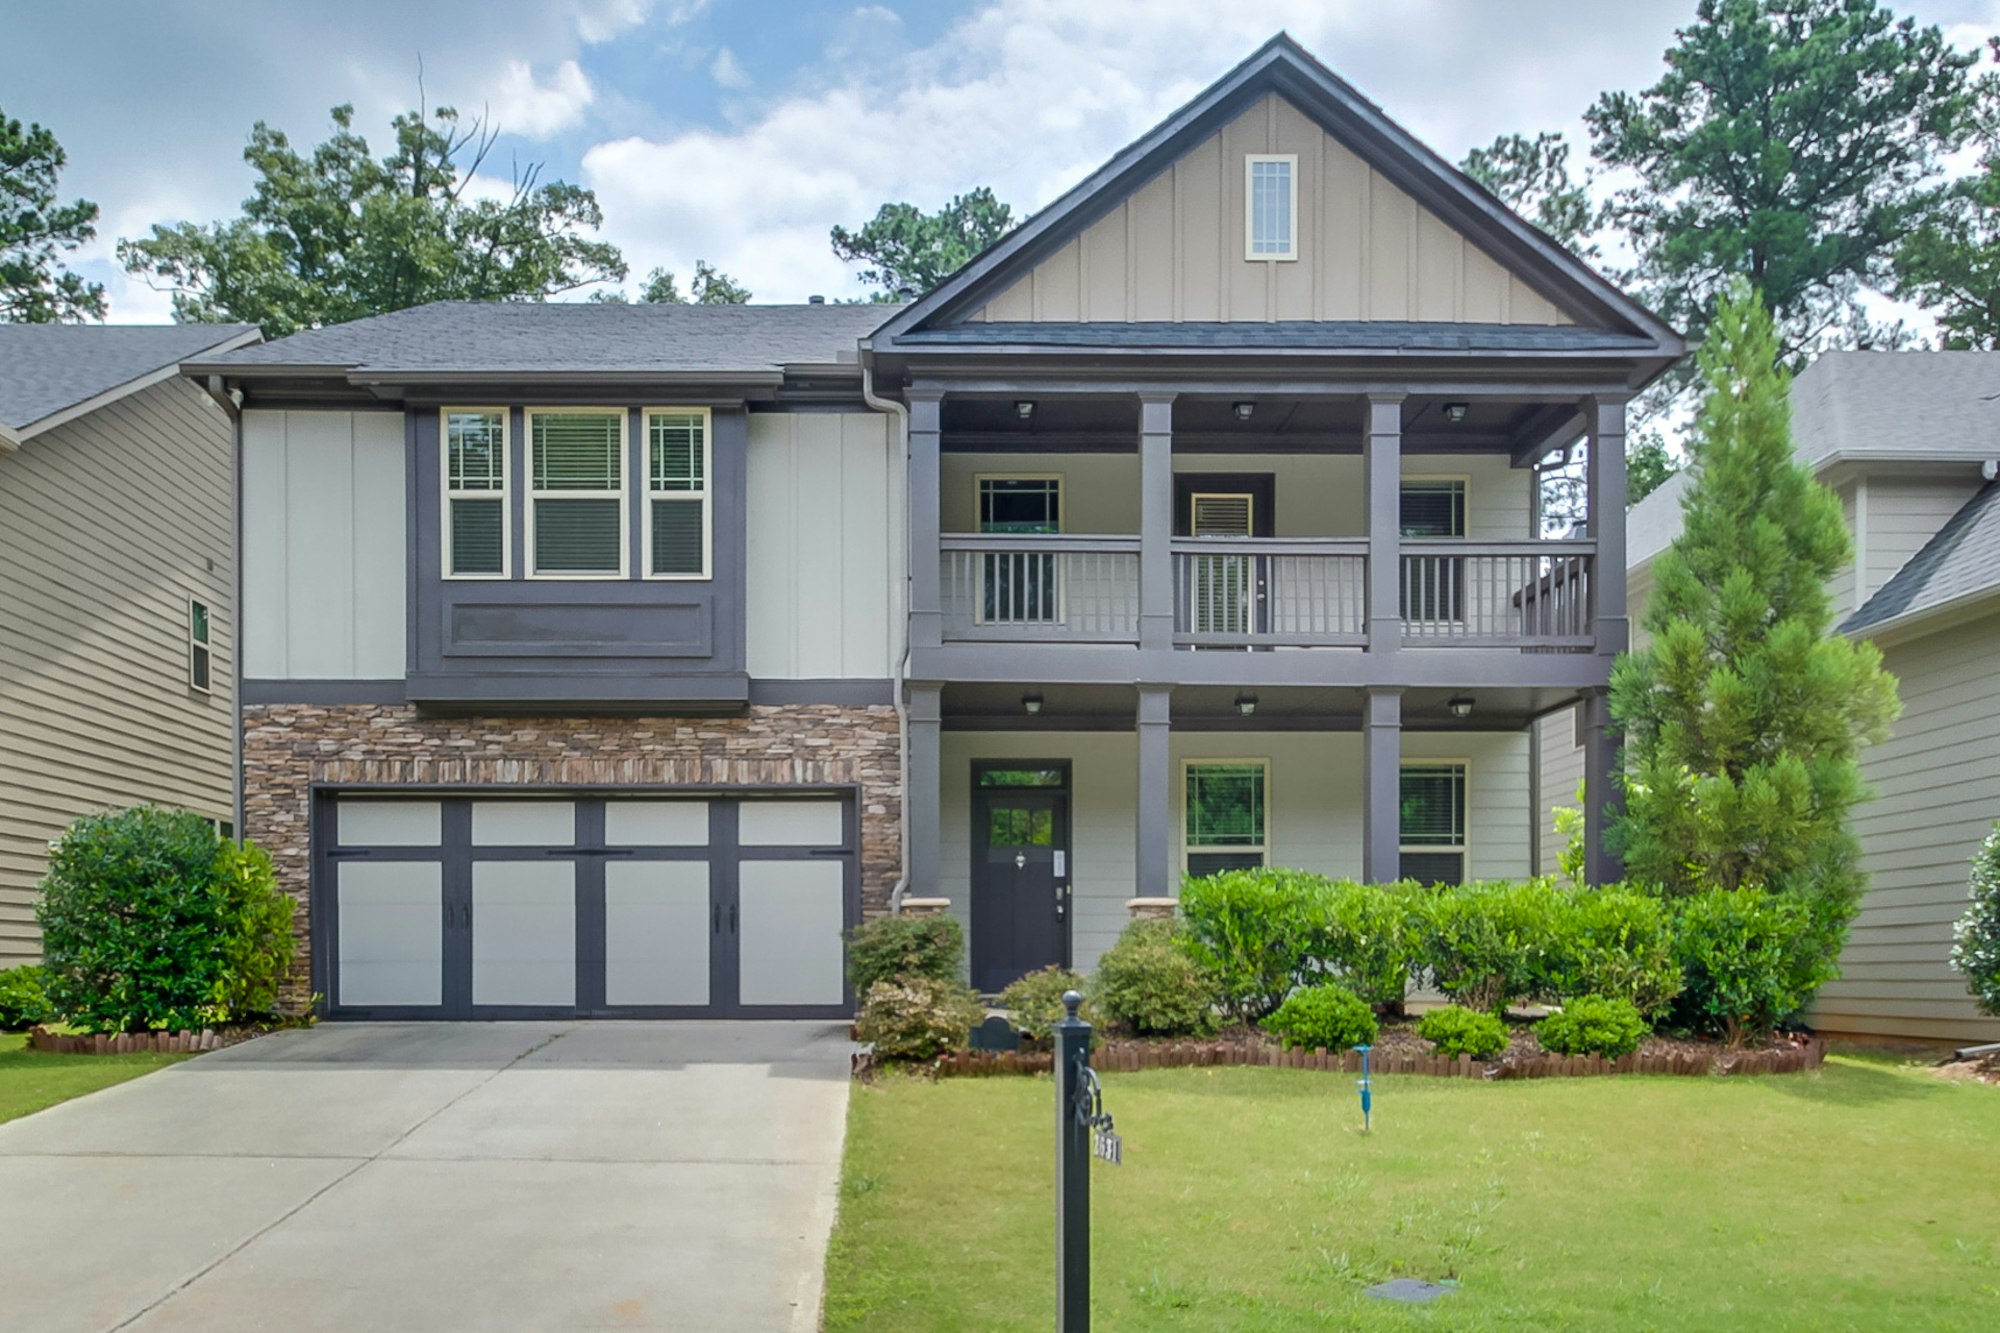 Photo 1 of 25 - 2631 Collins Cove Ave, Lawrenceville, GA 30043